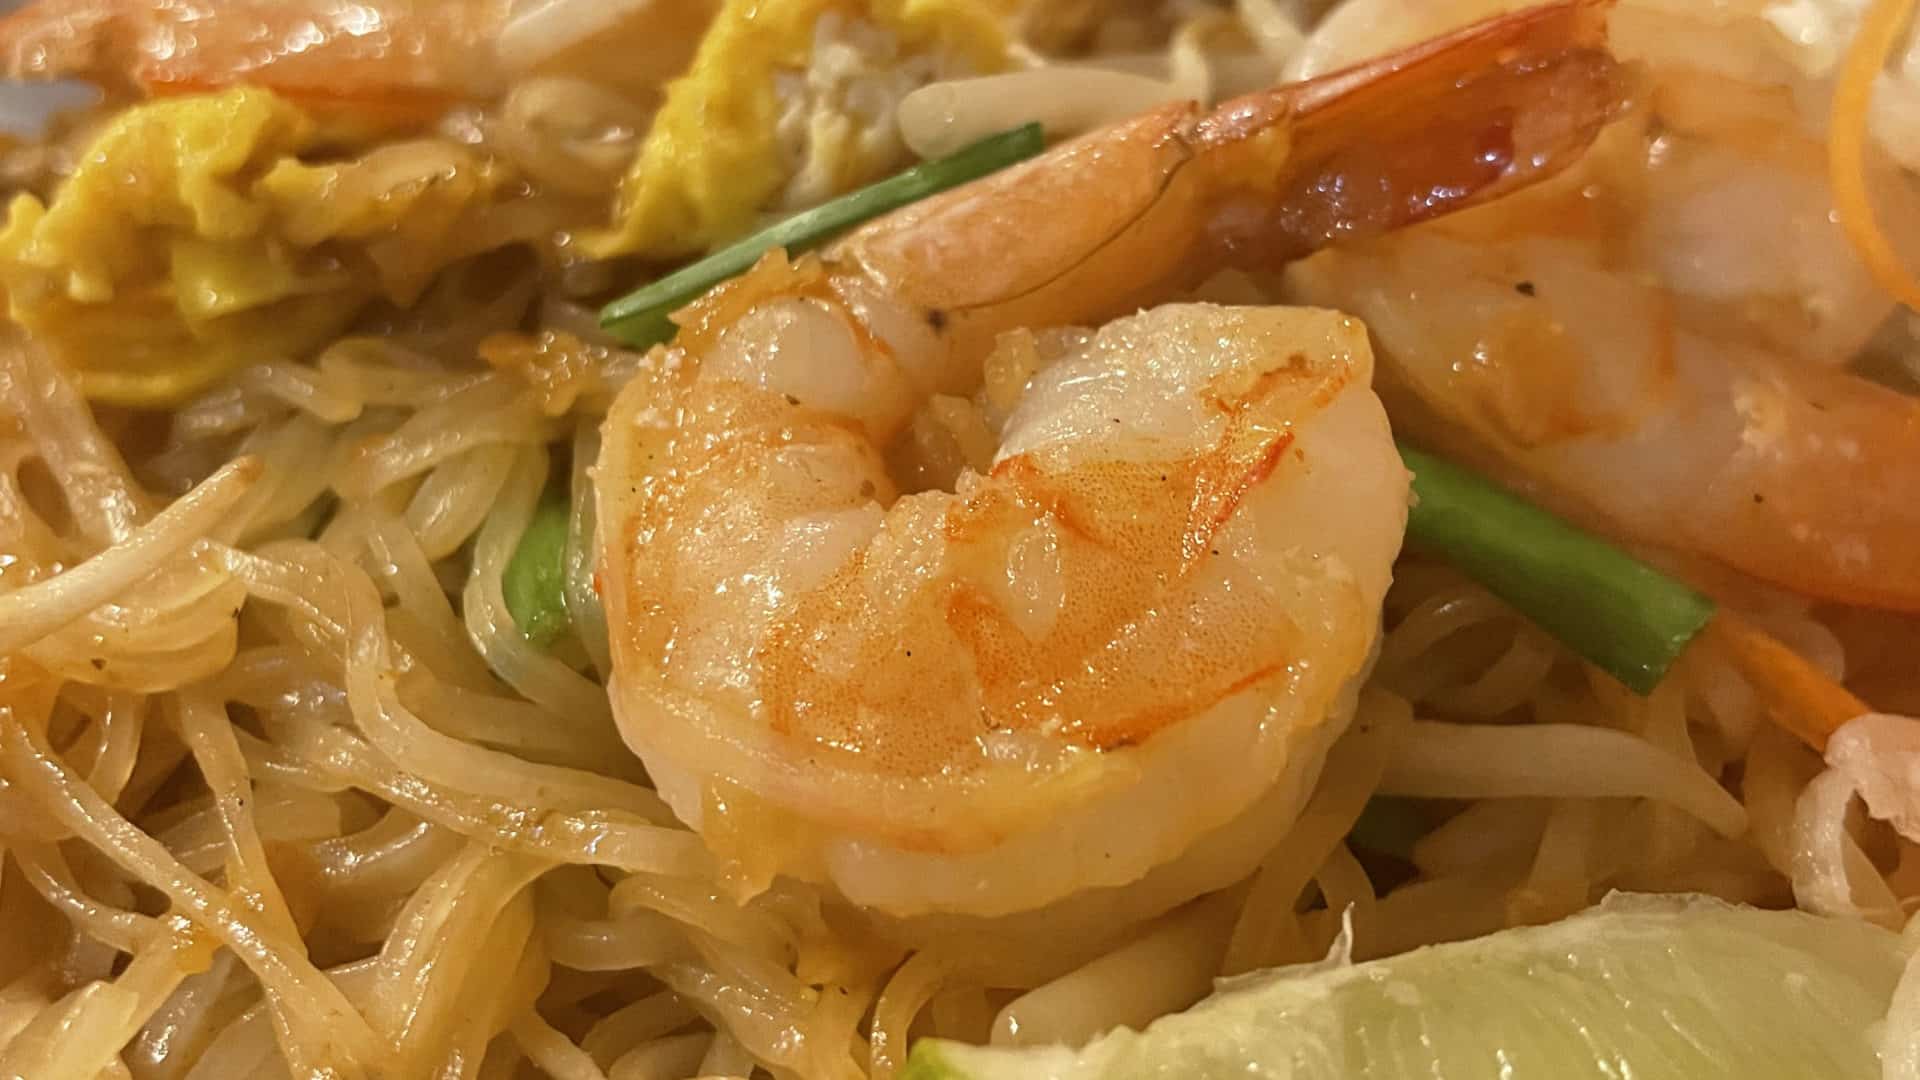 Shrimp sit temptingly on pad thai at Steam noodle cafe in Great Barrington.